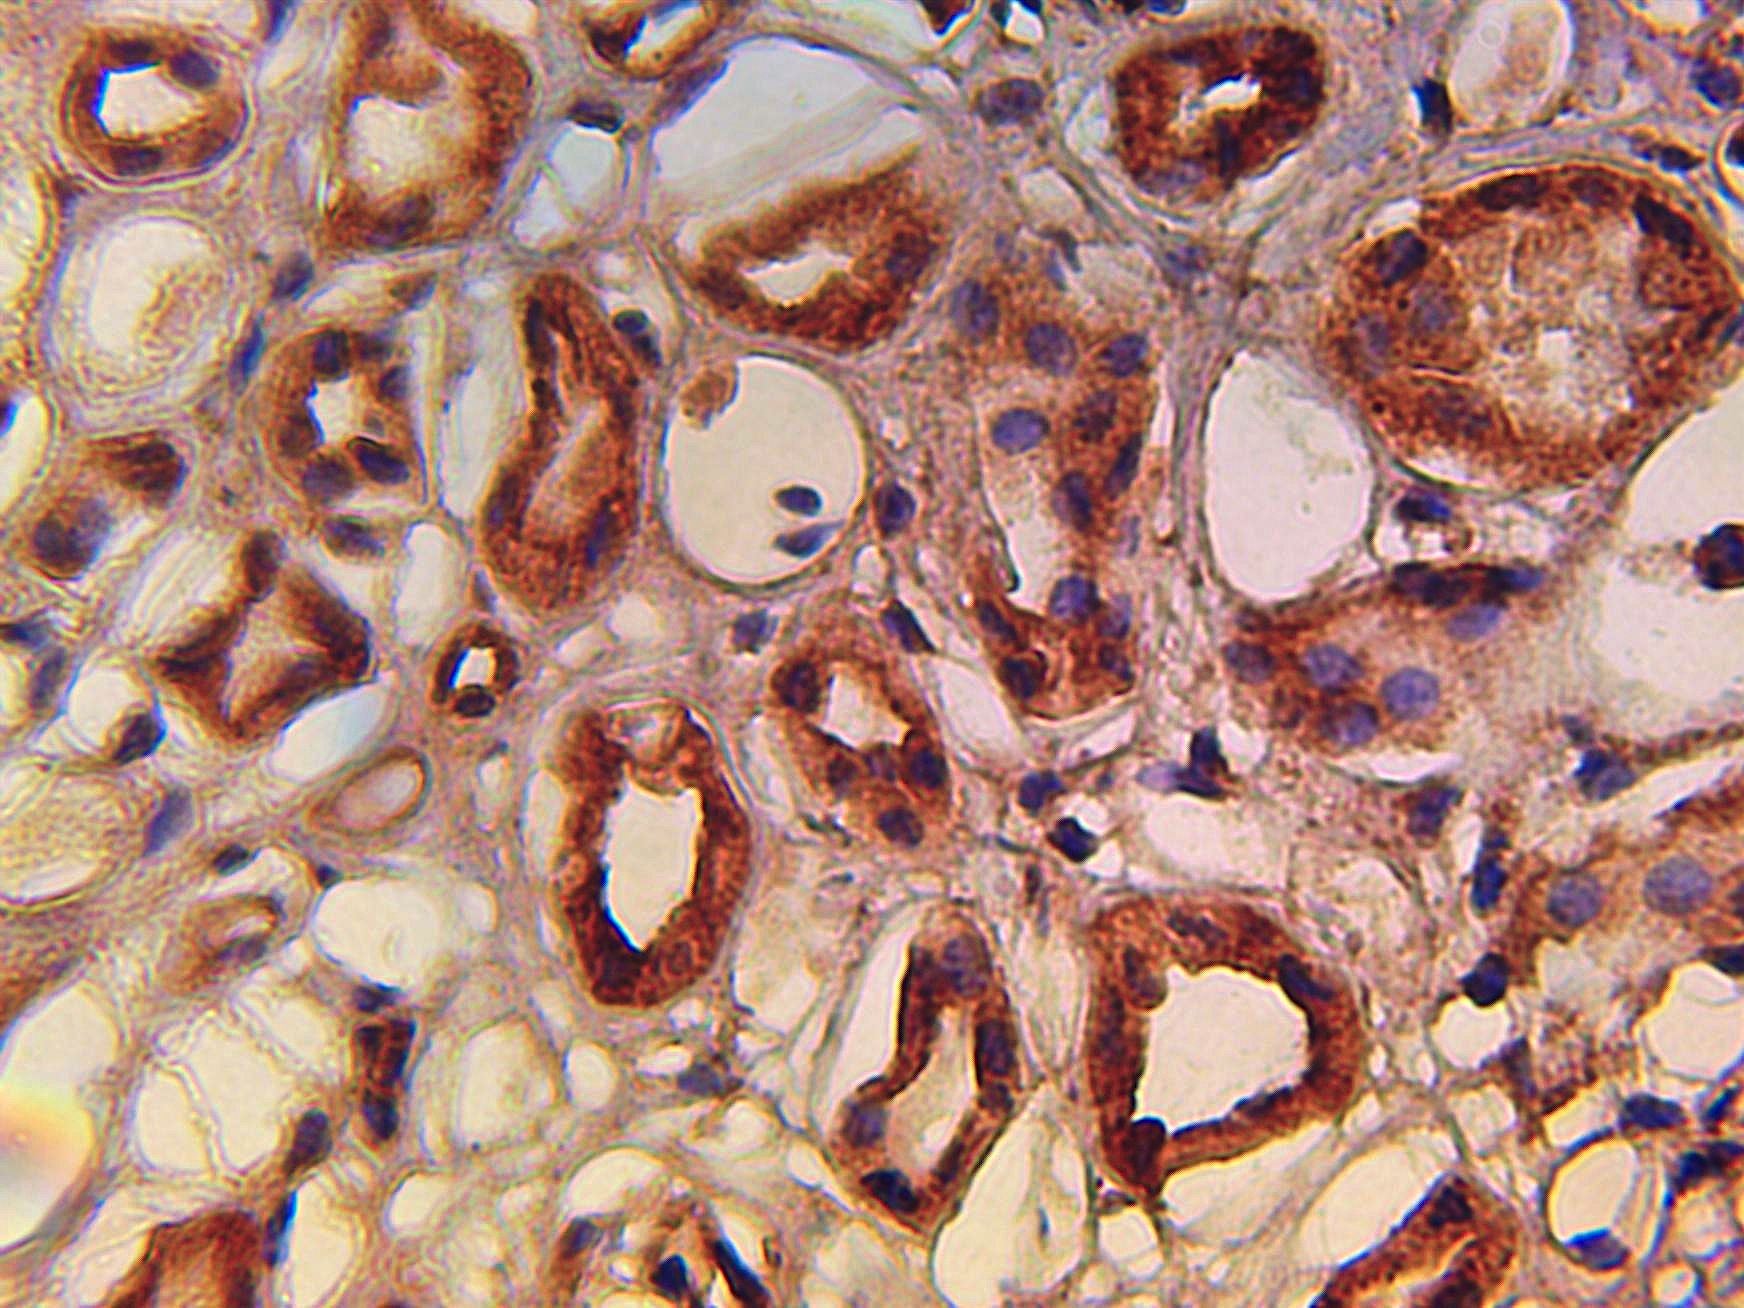 Immunohistochemical staining of normal human kidney tissue using Sirt1 antibody (Cat. No. X2739P) at 10 µg/ml and detected using anti-Rabbit HRP secondary antibody and visualized using DAB substrate and hematoxylin counterstain.